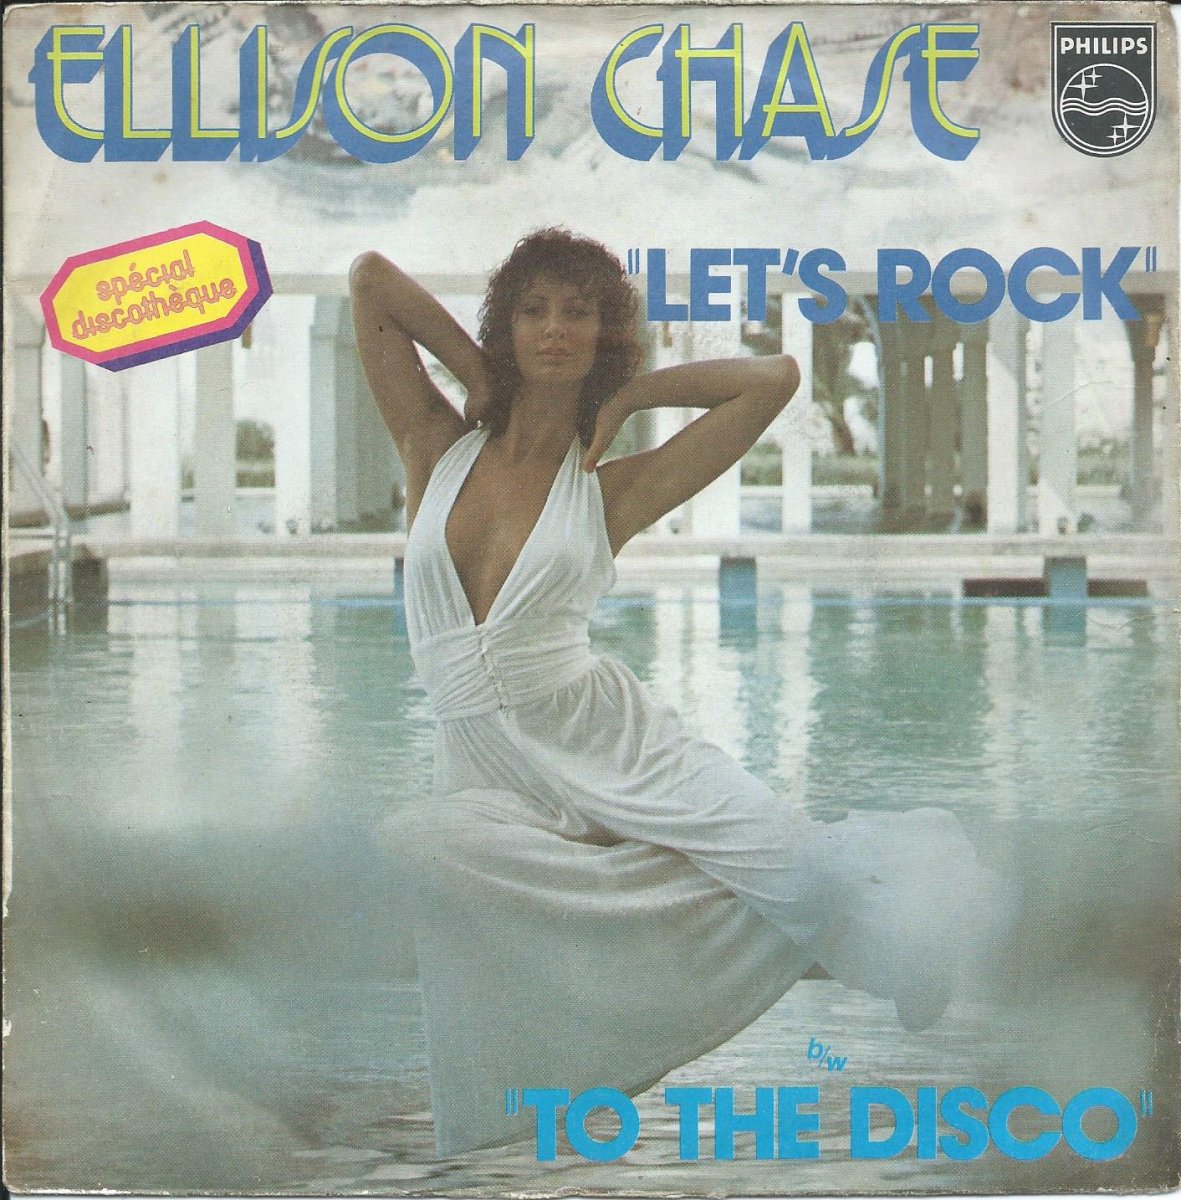 ELLISON CHASE ‎/ LET'S ROCK / TO THE DISCO (7